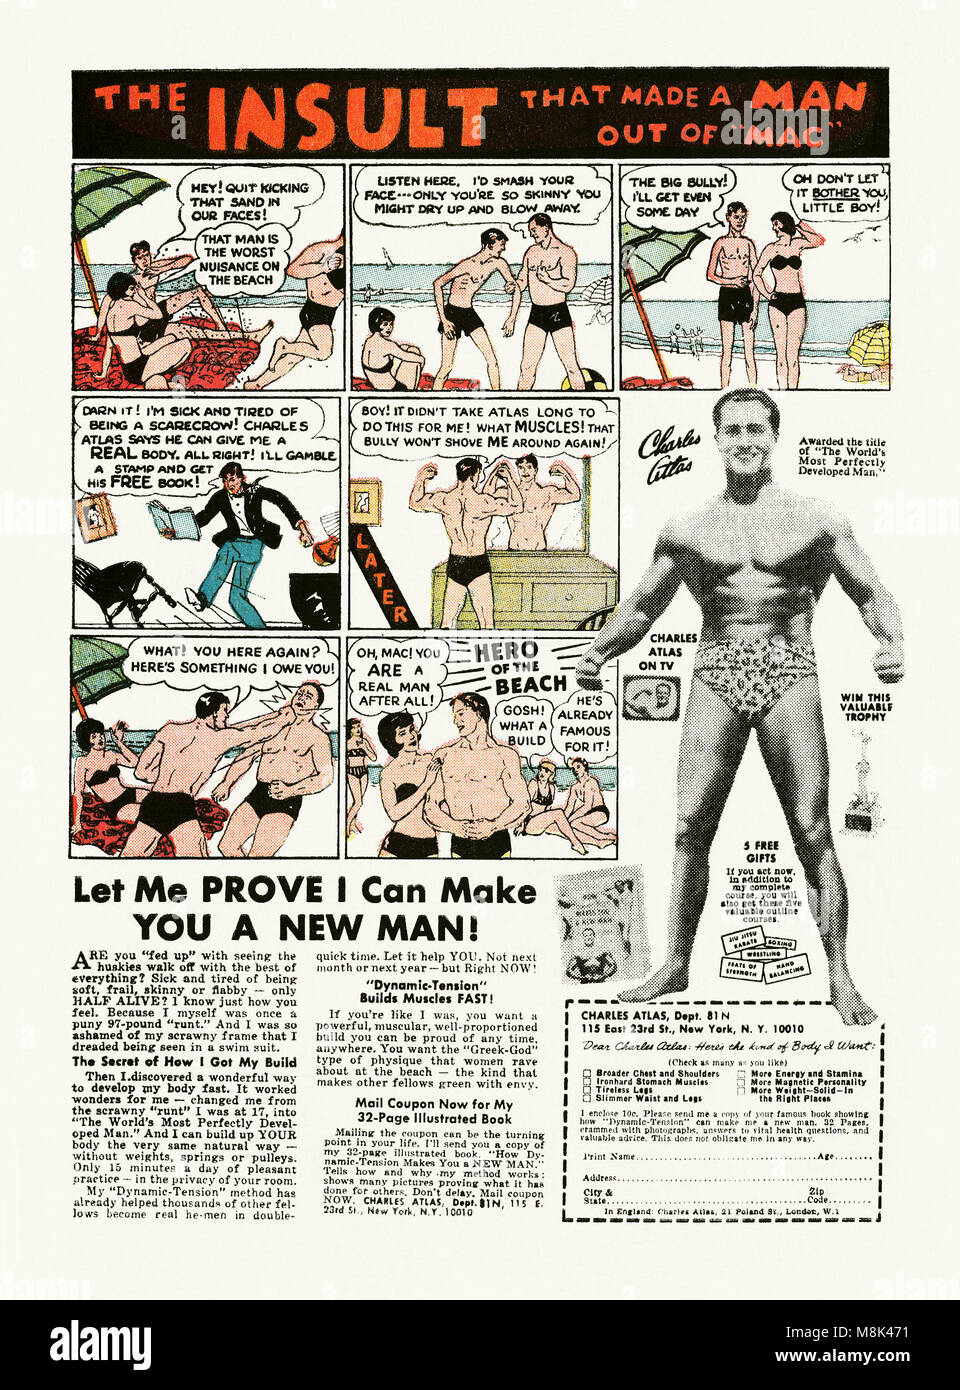 A 1974 advert for body building techniques by Charles Atlas. Here a comic strip depicts a beach scene featuring a bully kicking sand in a 'weakling's' face - this is the catalyst for taking action to improve to a far more 'manly' physique. The advertising campaign featuring his name and body was possibly one of the longest-lasting campaigns of all time. Atlas trained himself to develop his body from that of a 'scrawny weakling', eventually becoming the most popular bodybuilder of his day Stock Photo